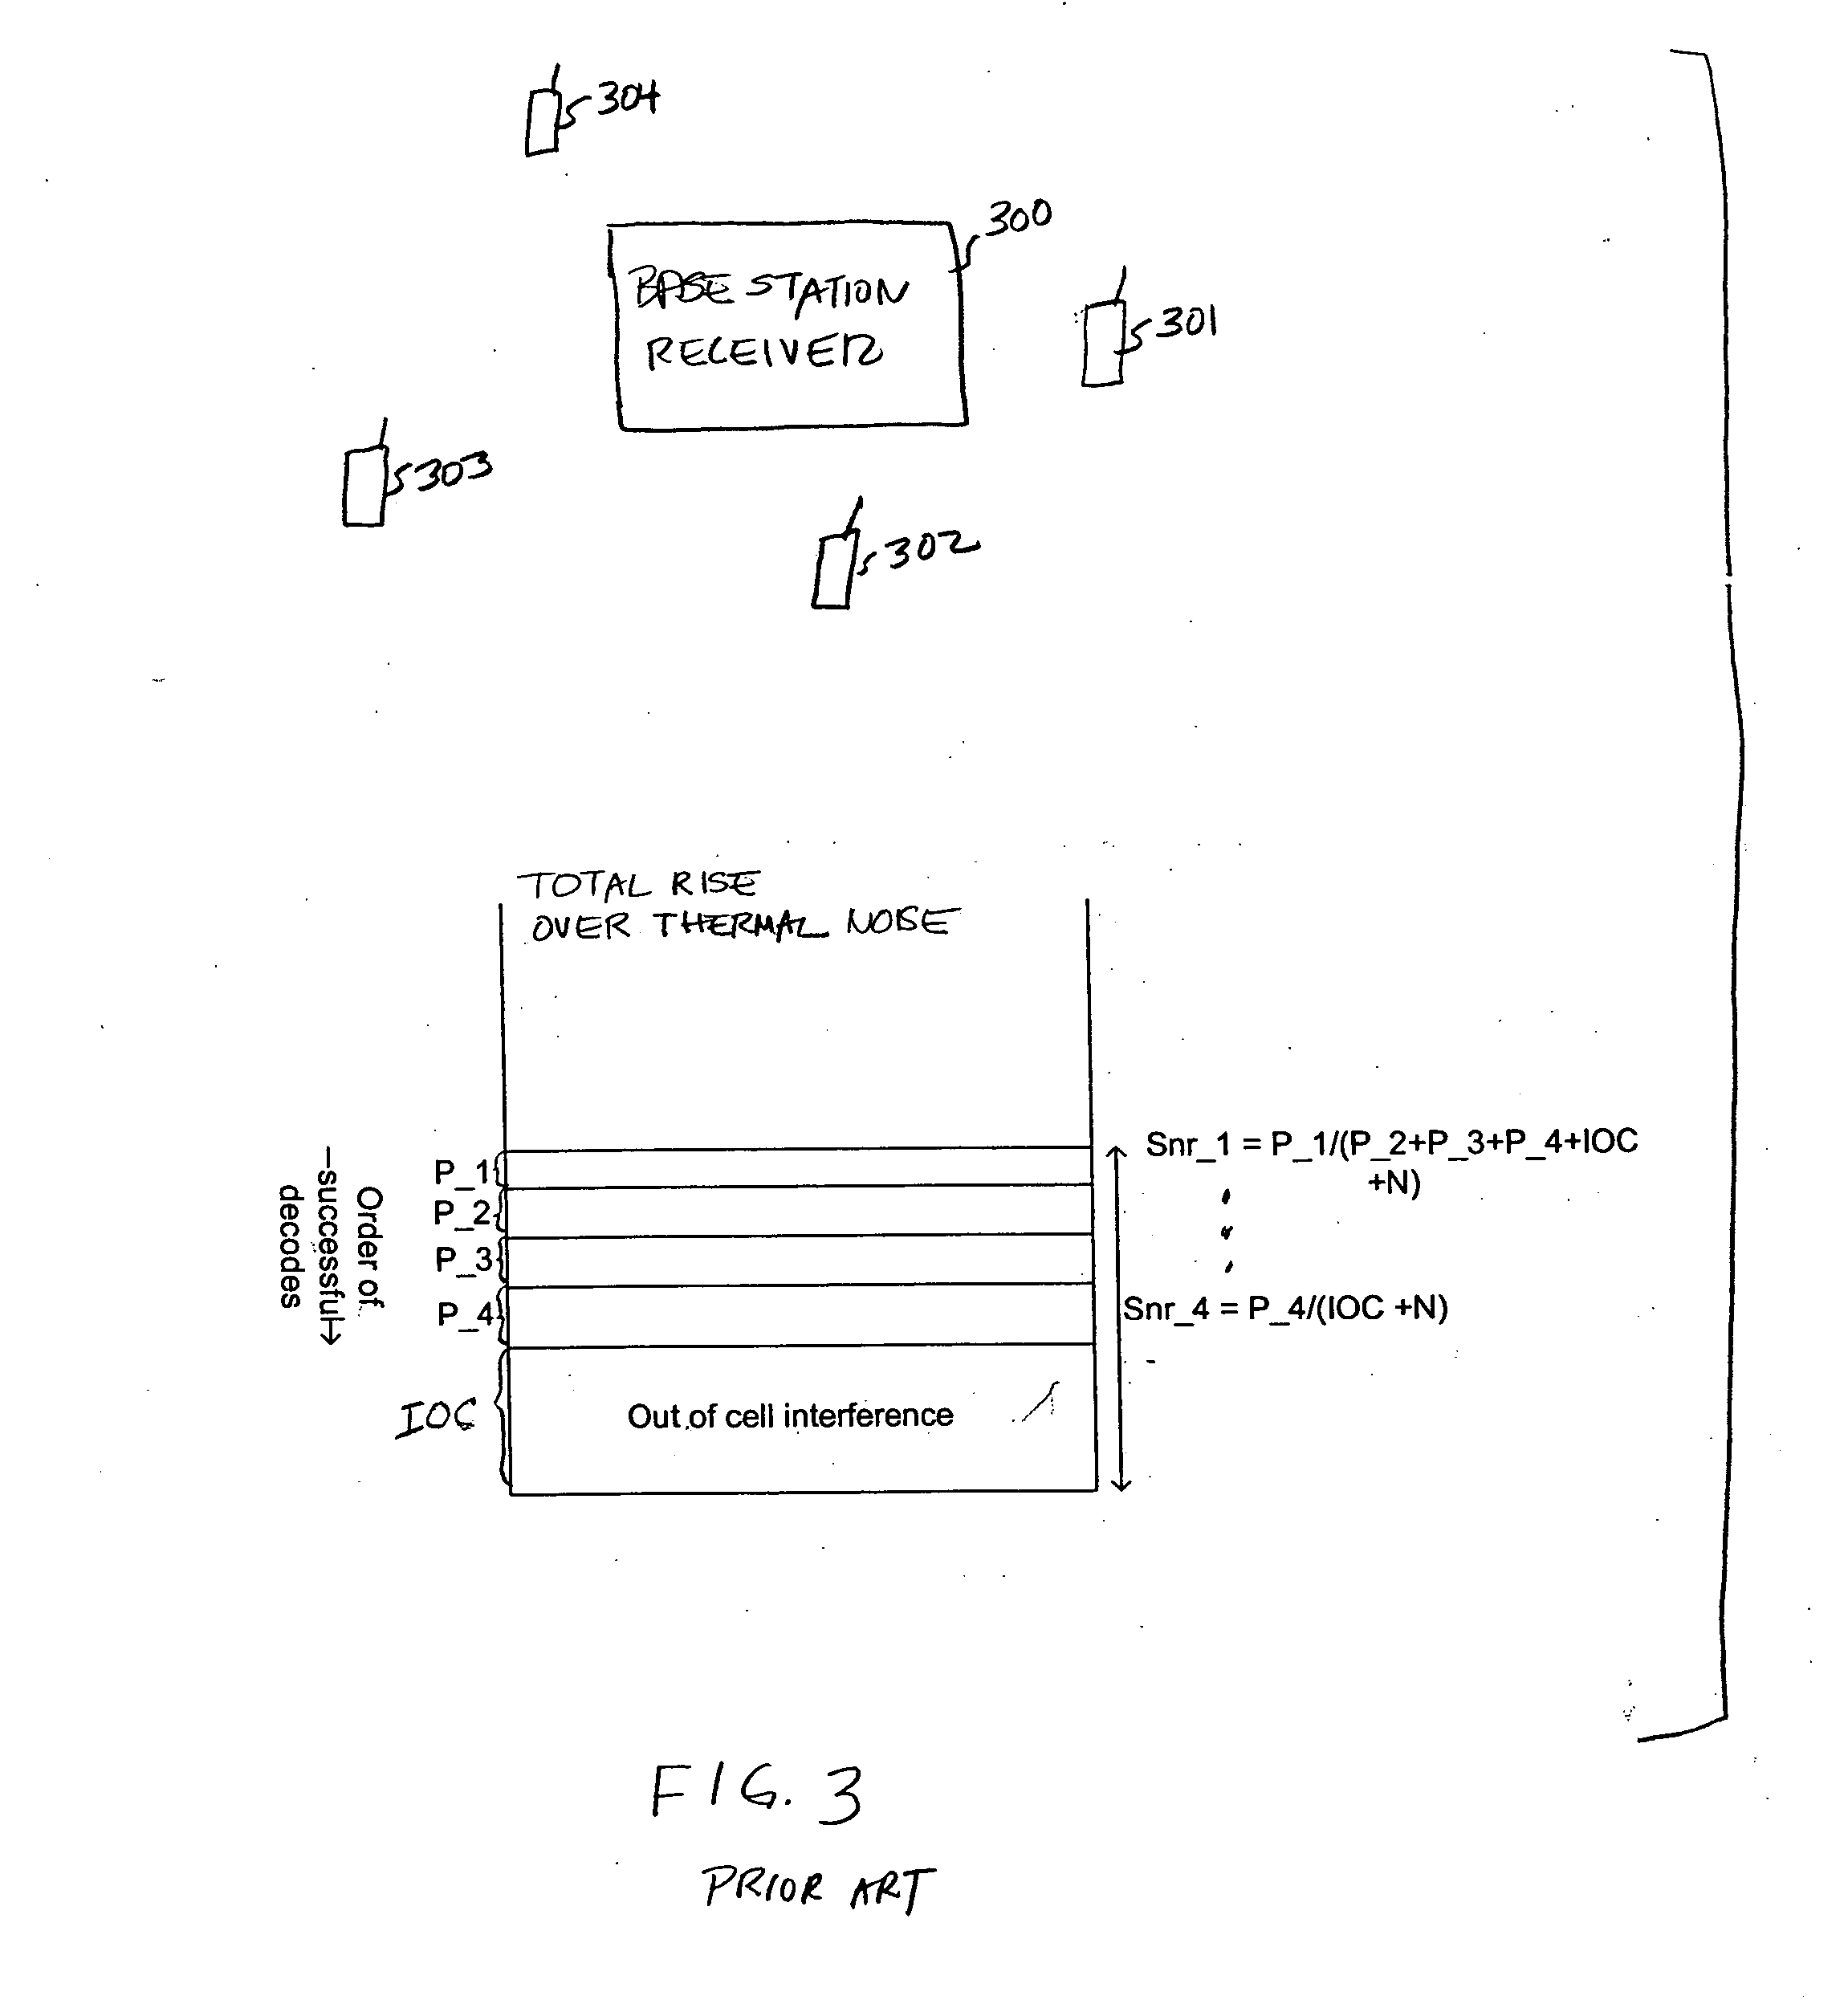 Method to control the effects of out-of-cell interference in a wireless cellular system using backhaul transmission of decoded data and formats